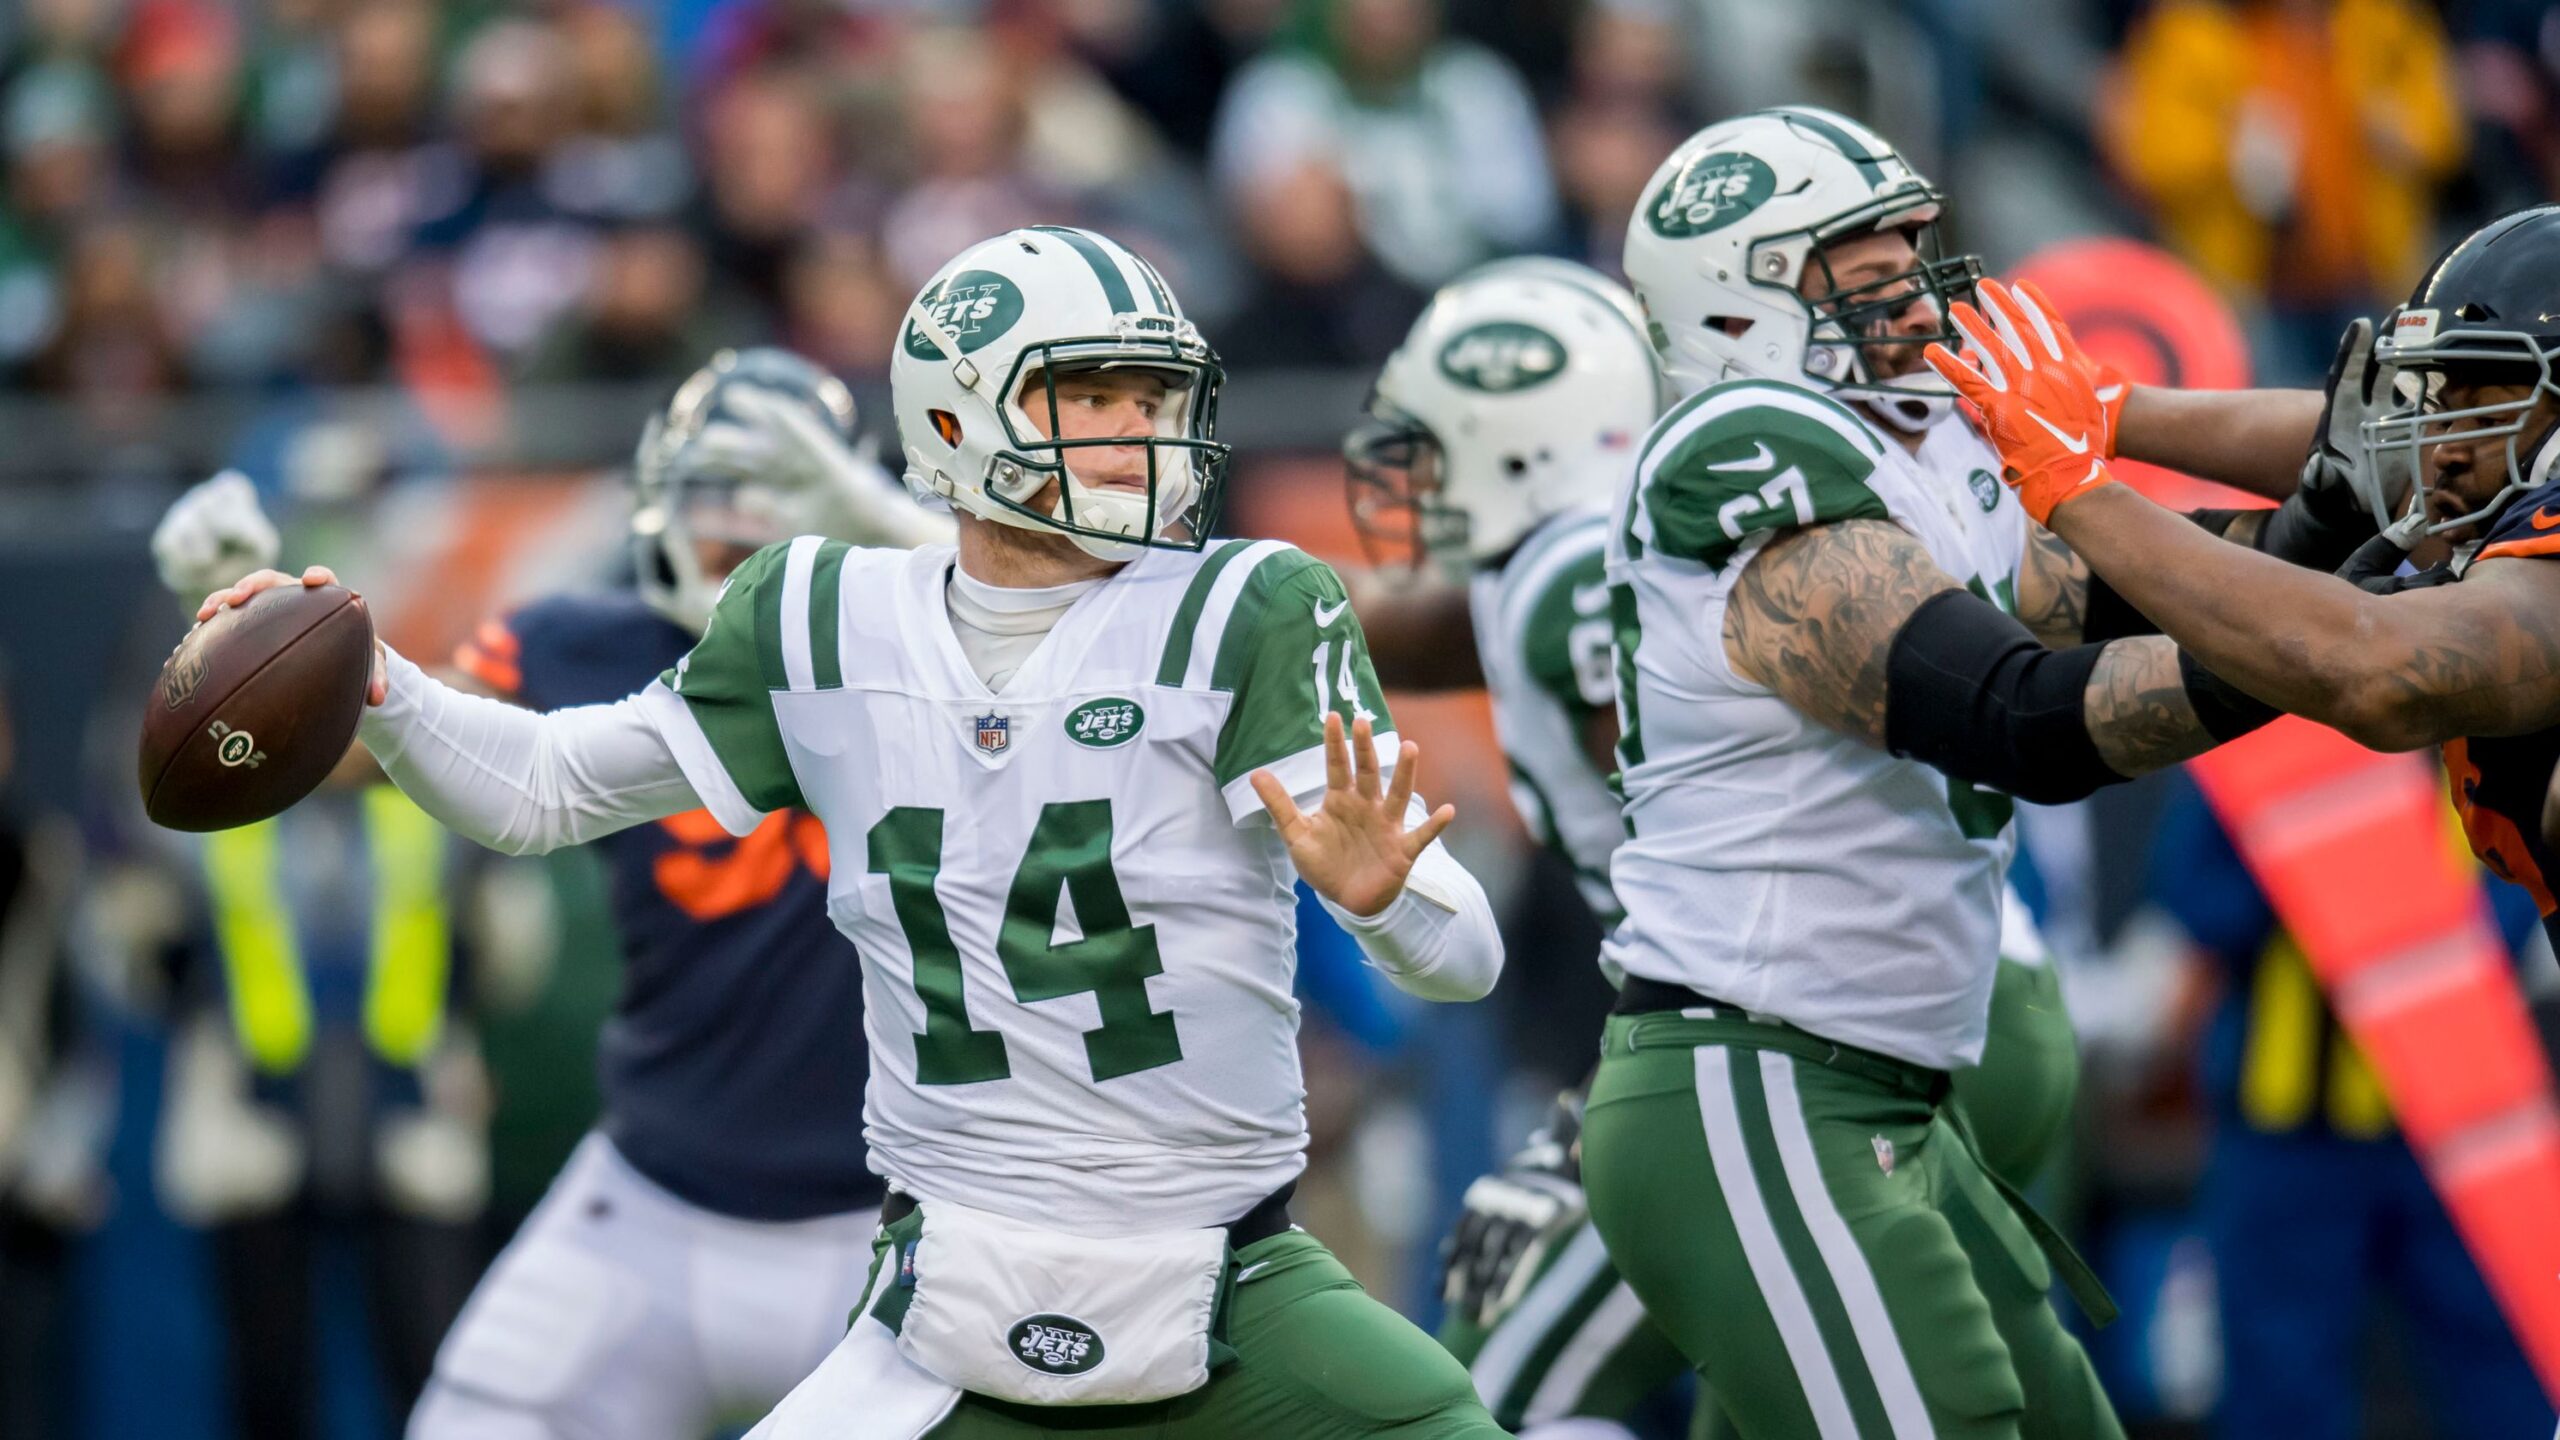 New York Jets Taking Heat for Promotional Deal with Online Poker Operator 888